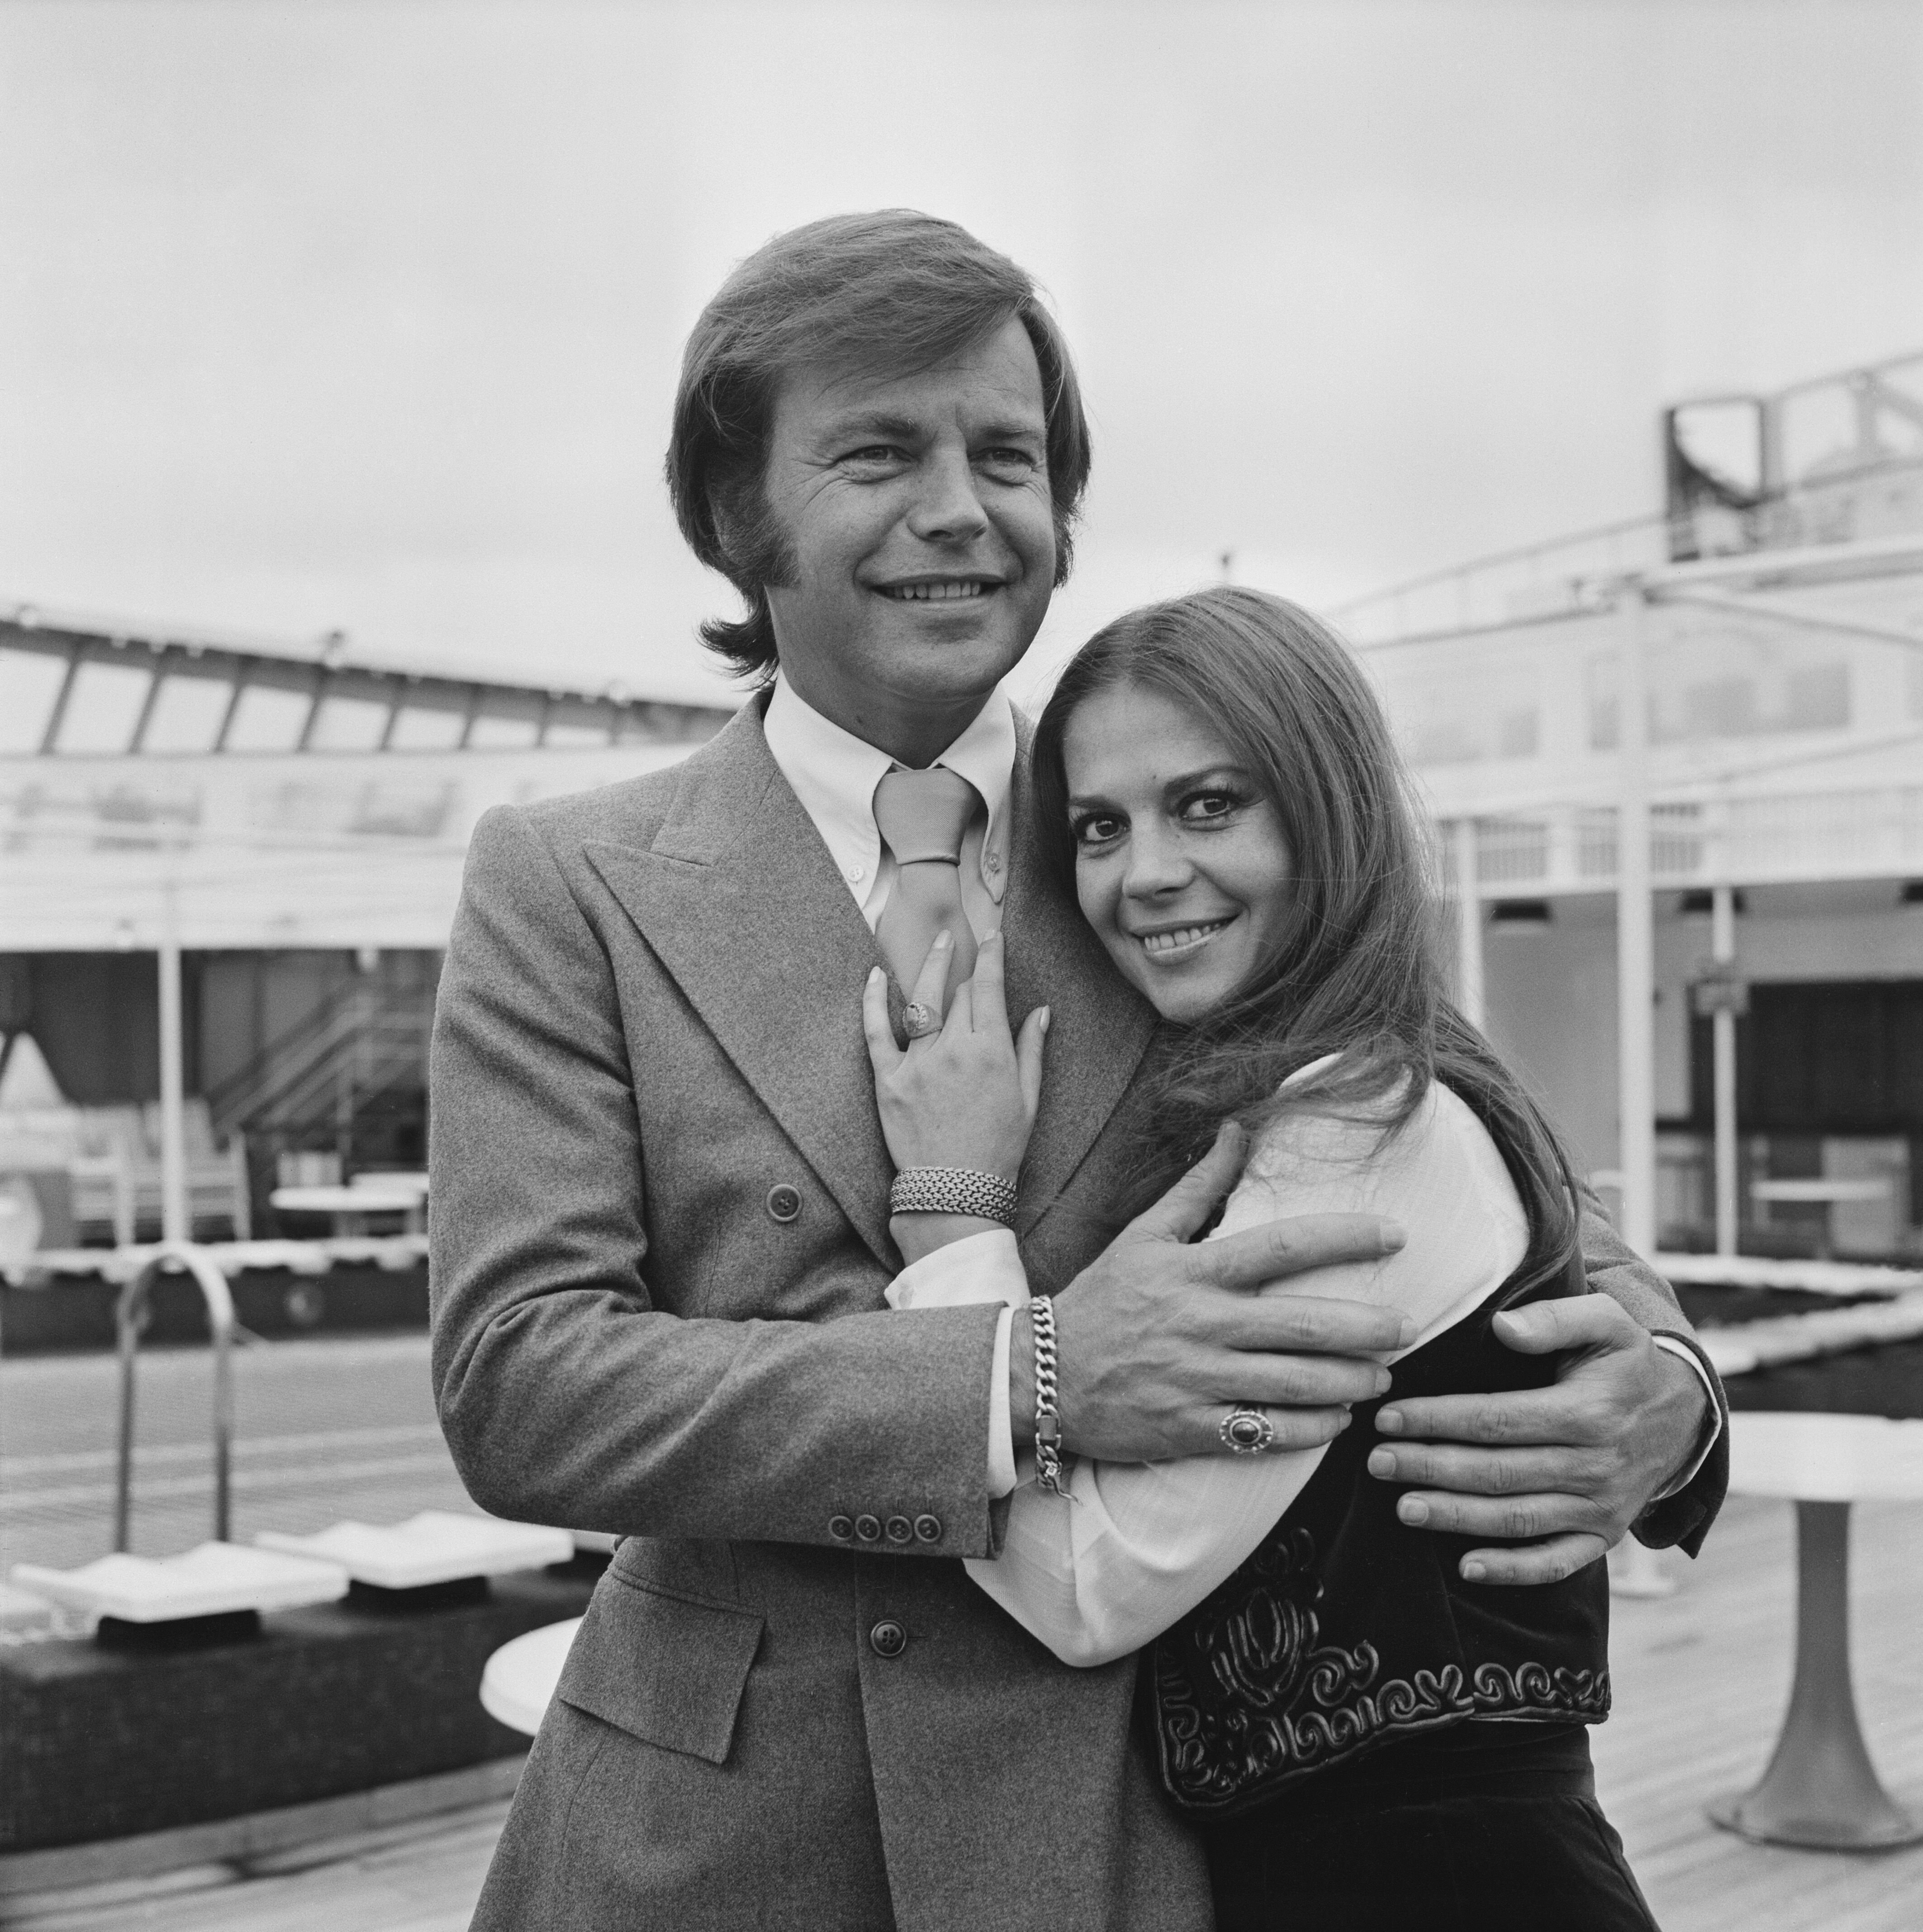 Newlyweds Robert Wagner and Natalie Wood,1972 | Source: Getty Images